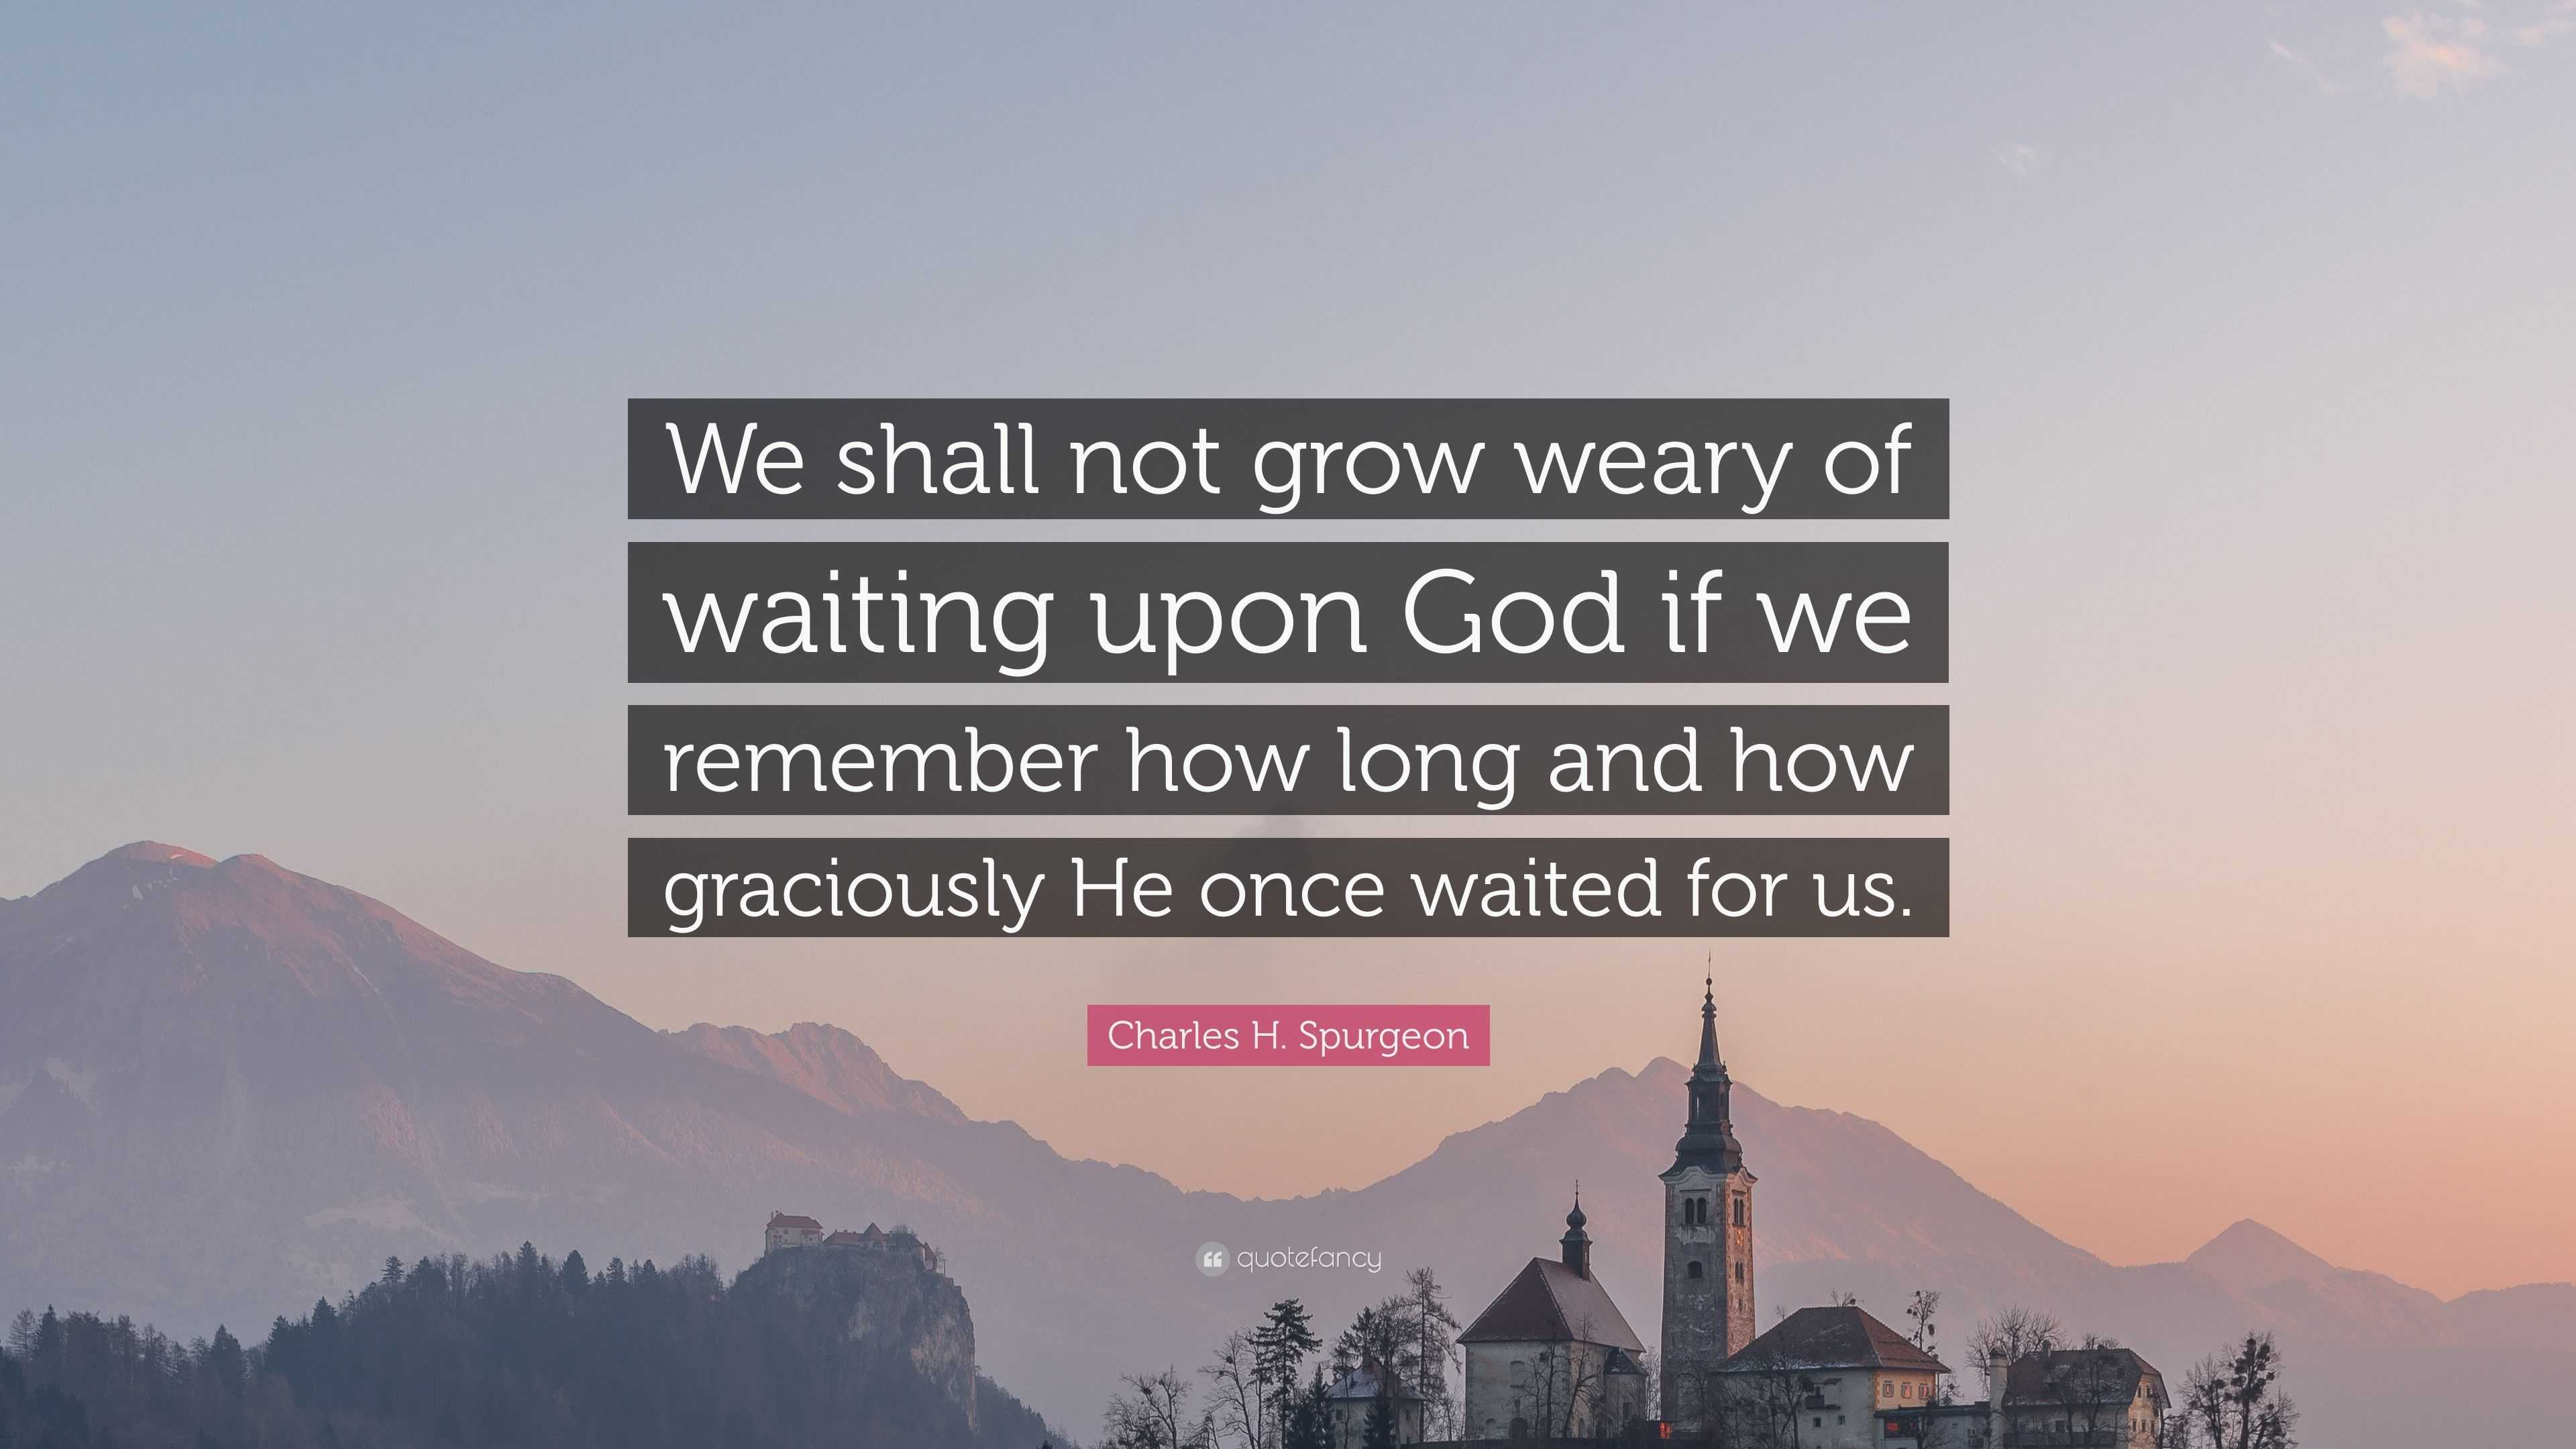 Charles H Spurgeon Quote “we Shall Not Grow Weary Of Waiting Upon God If We Remember How Long